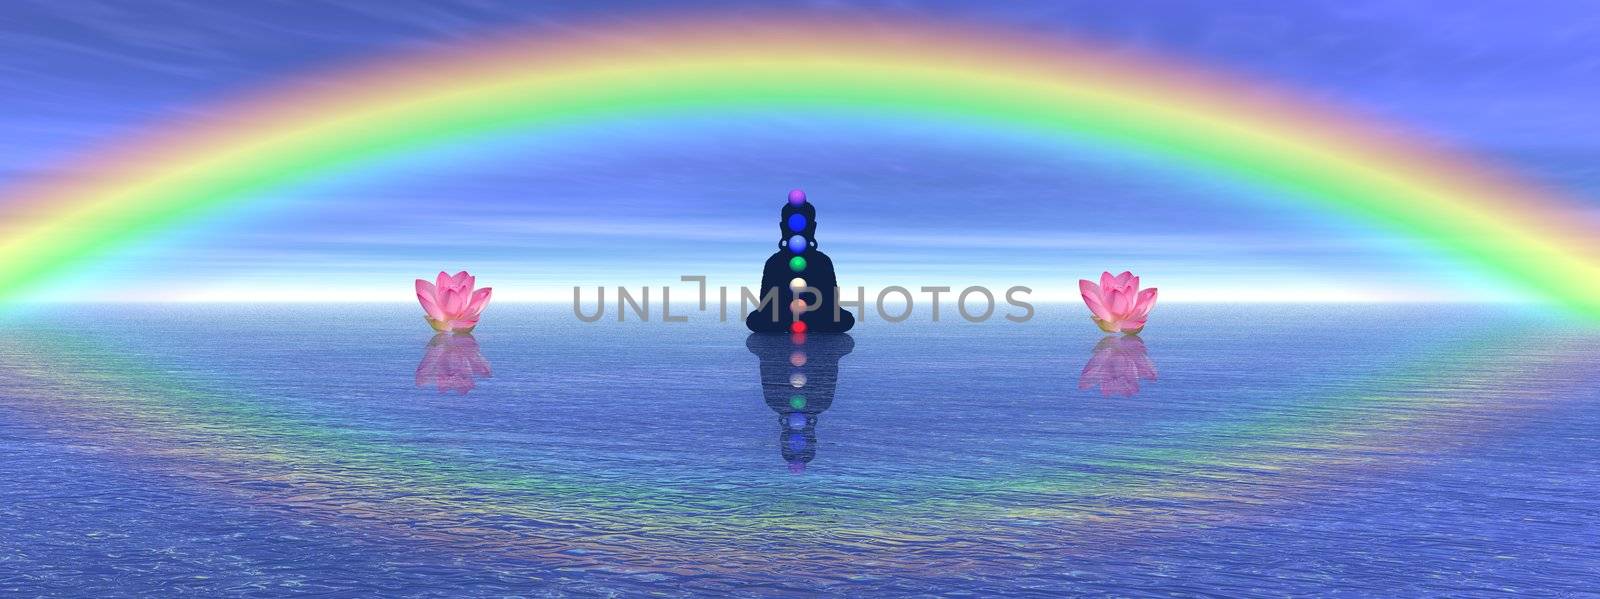 Shadow in meditation with chakras next to two waterlilies, on the ocean and under a big beautiful rainbow